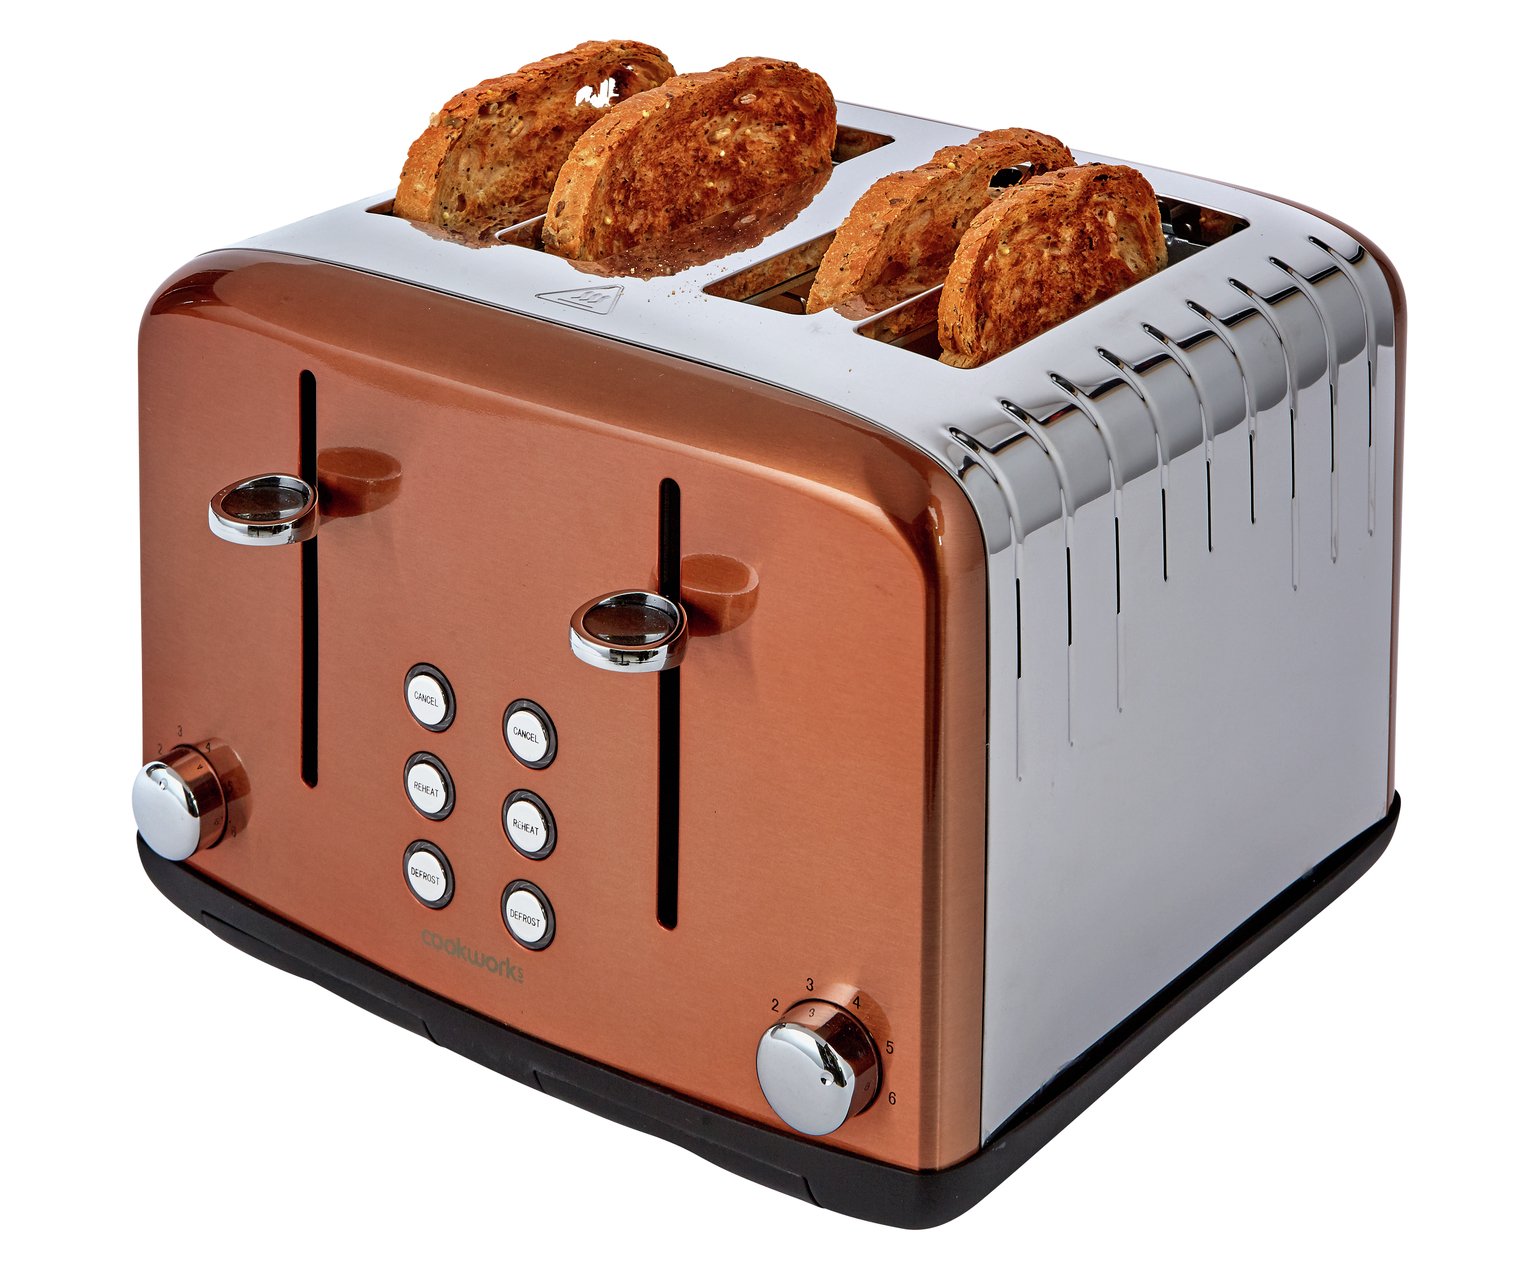 Cookworks Pyramid 4 Slice Toaster Review